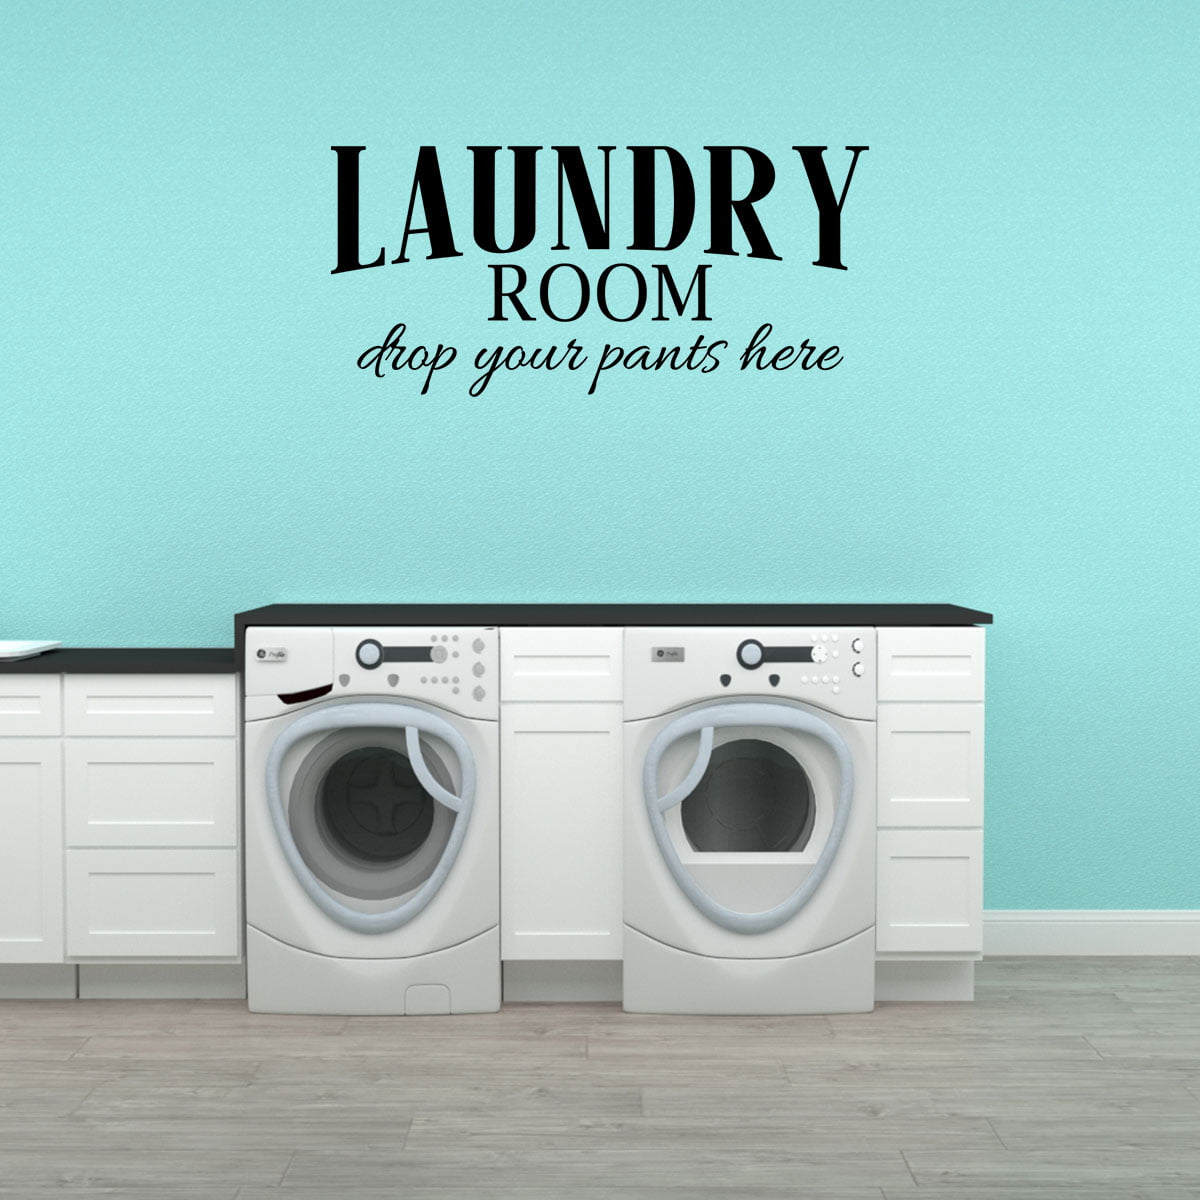 LAUNDRY DROP YOUR DRAWERS HERE WALL QUOTE DECAL VINYL WORDS HOME LETTERING 